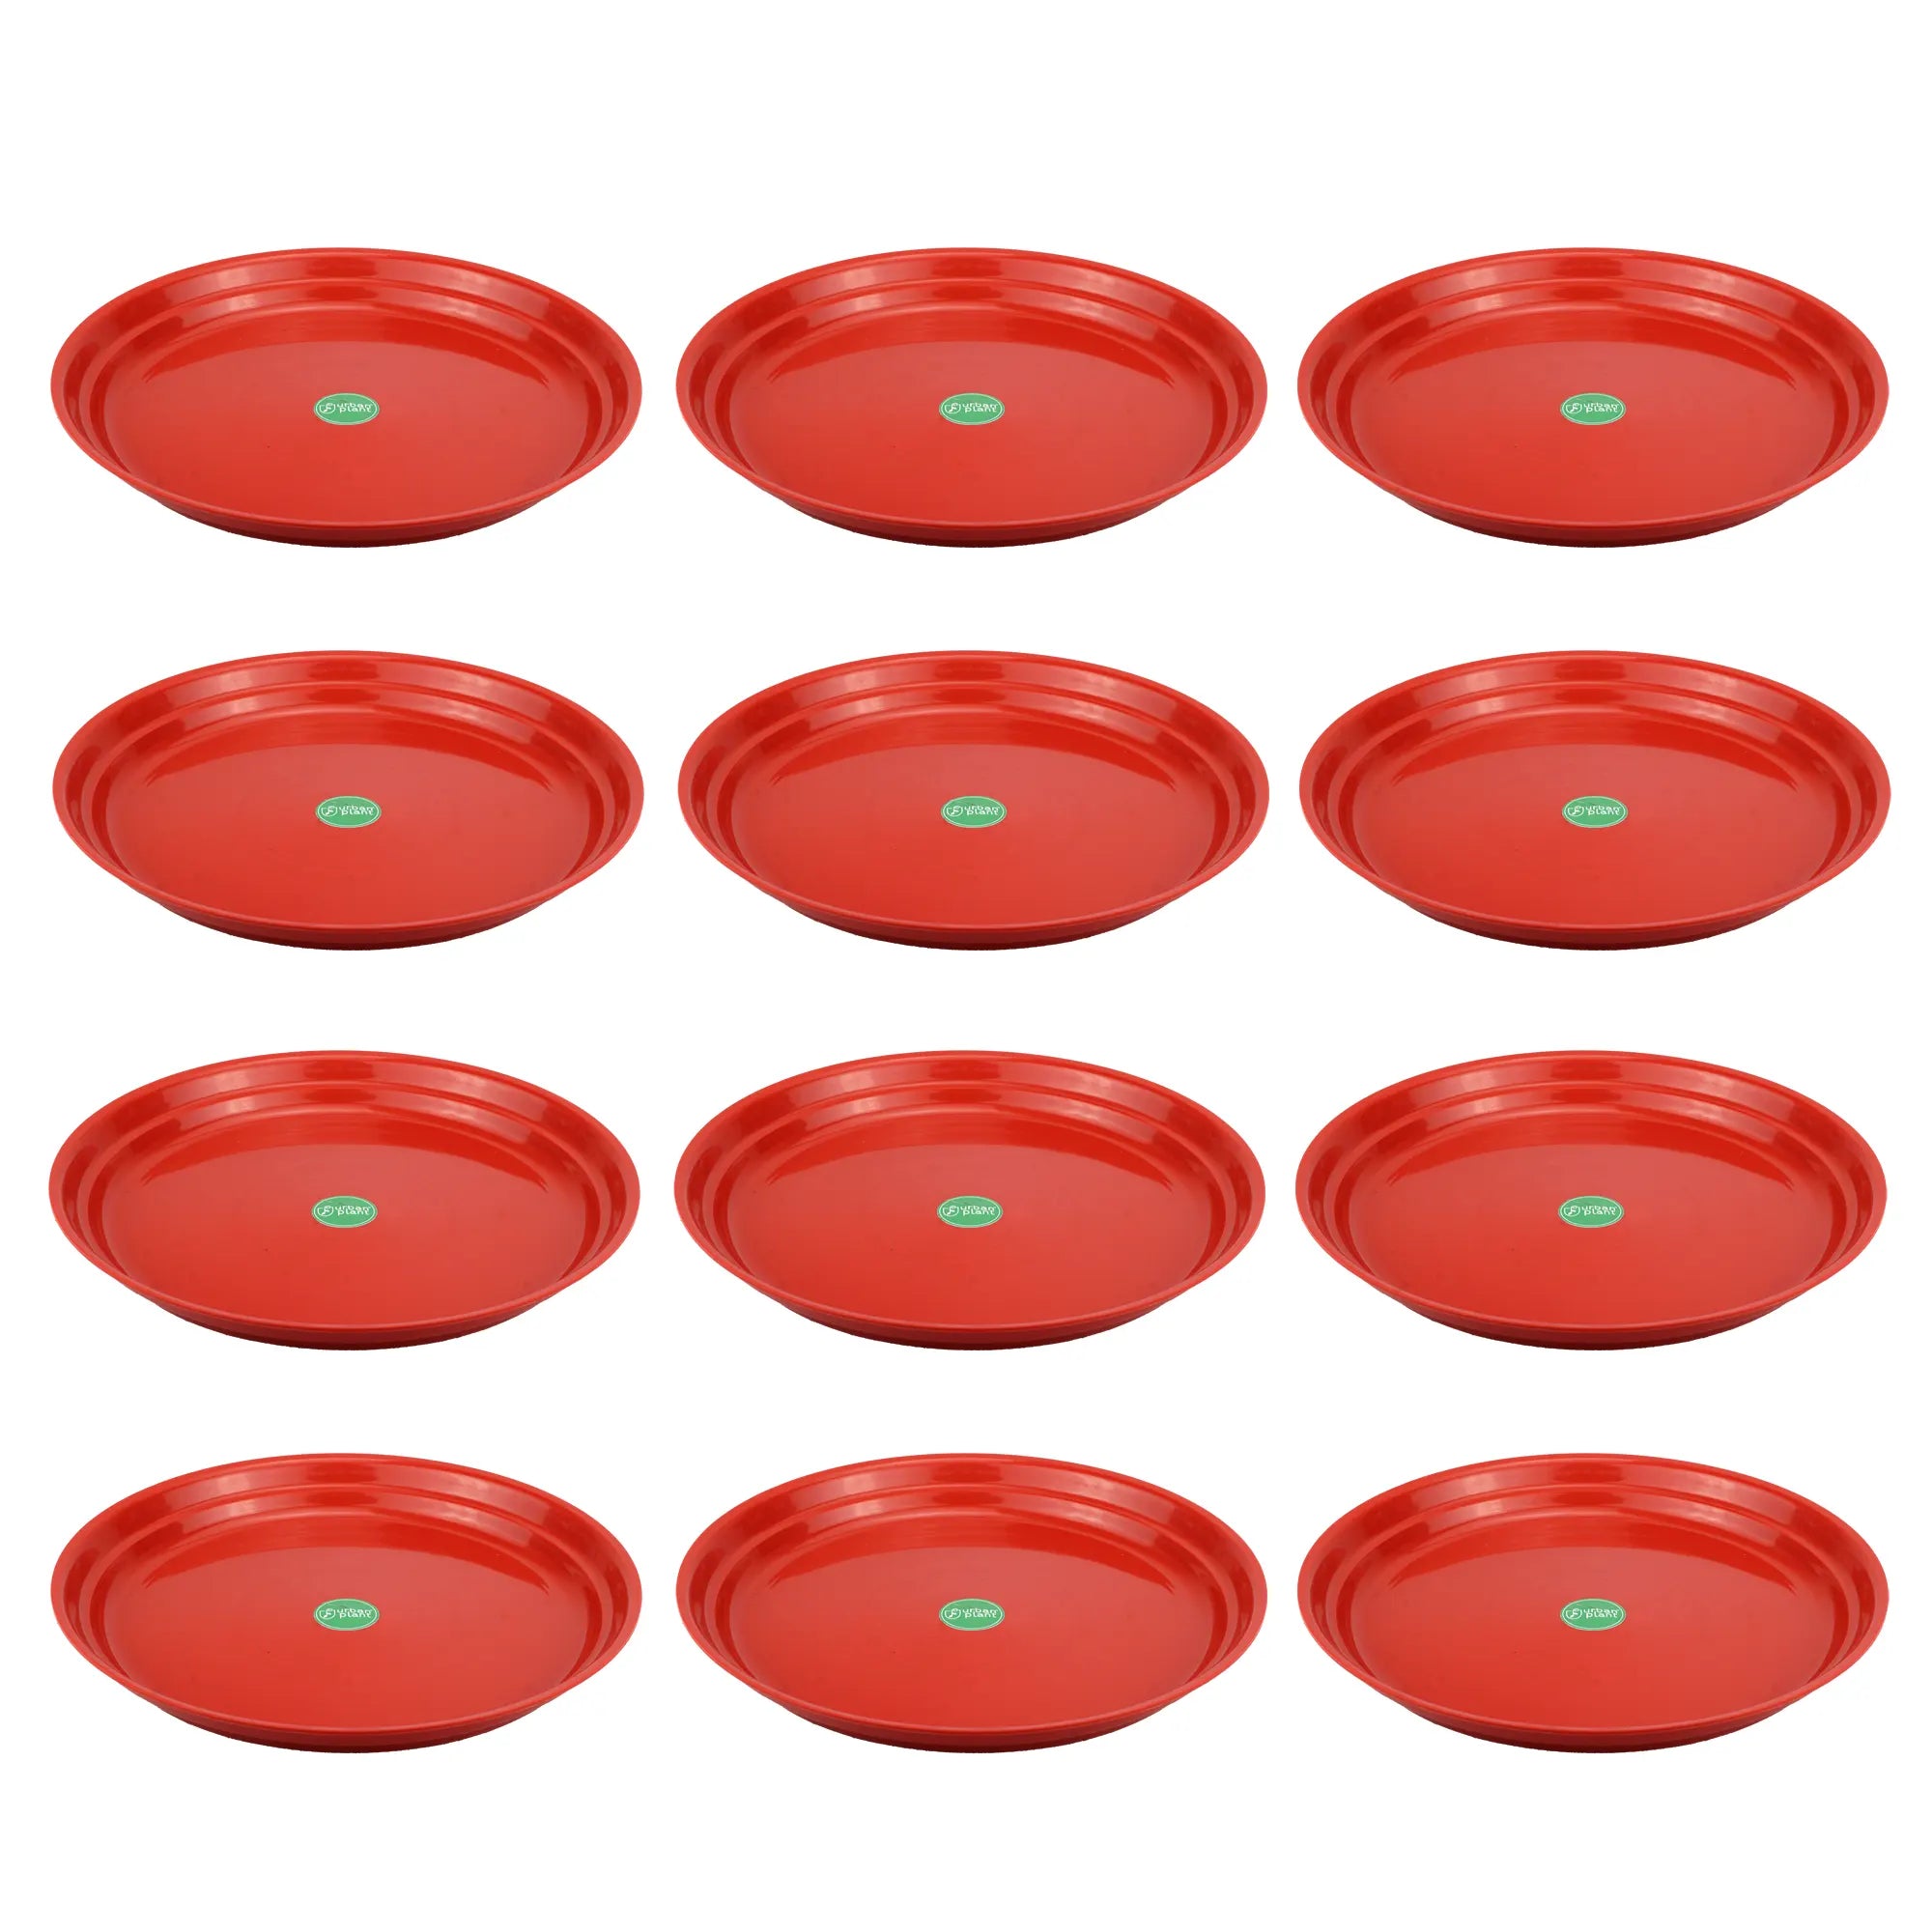 Urban Plant Round Bottom Tray (Plate/Saucer) for All Type of Pots Urban Plant 12 Inch Set of 12 